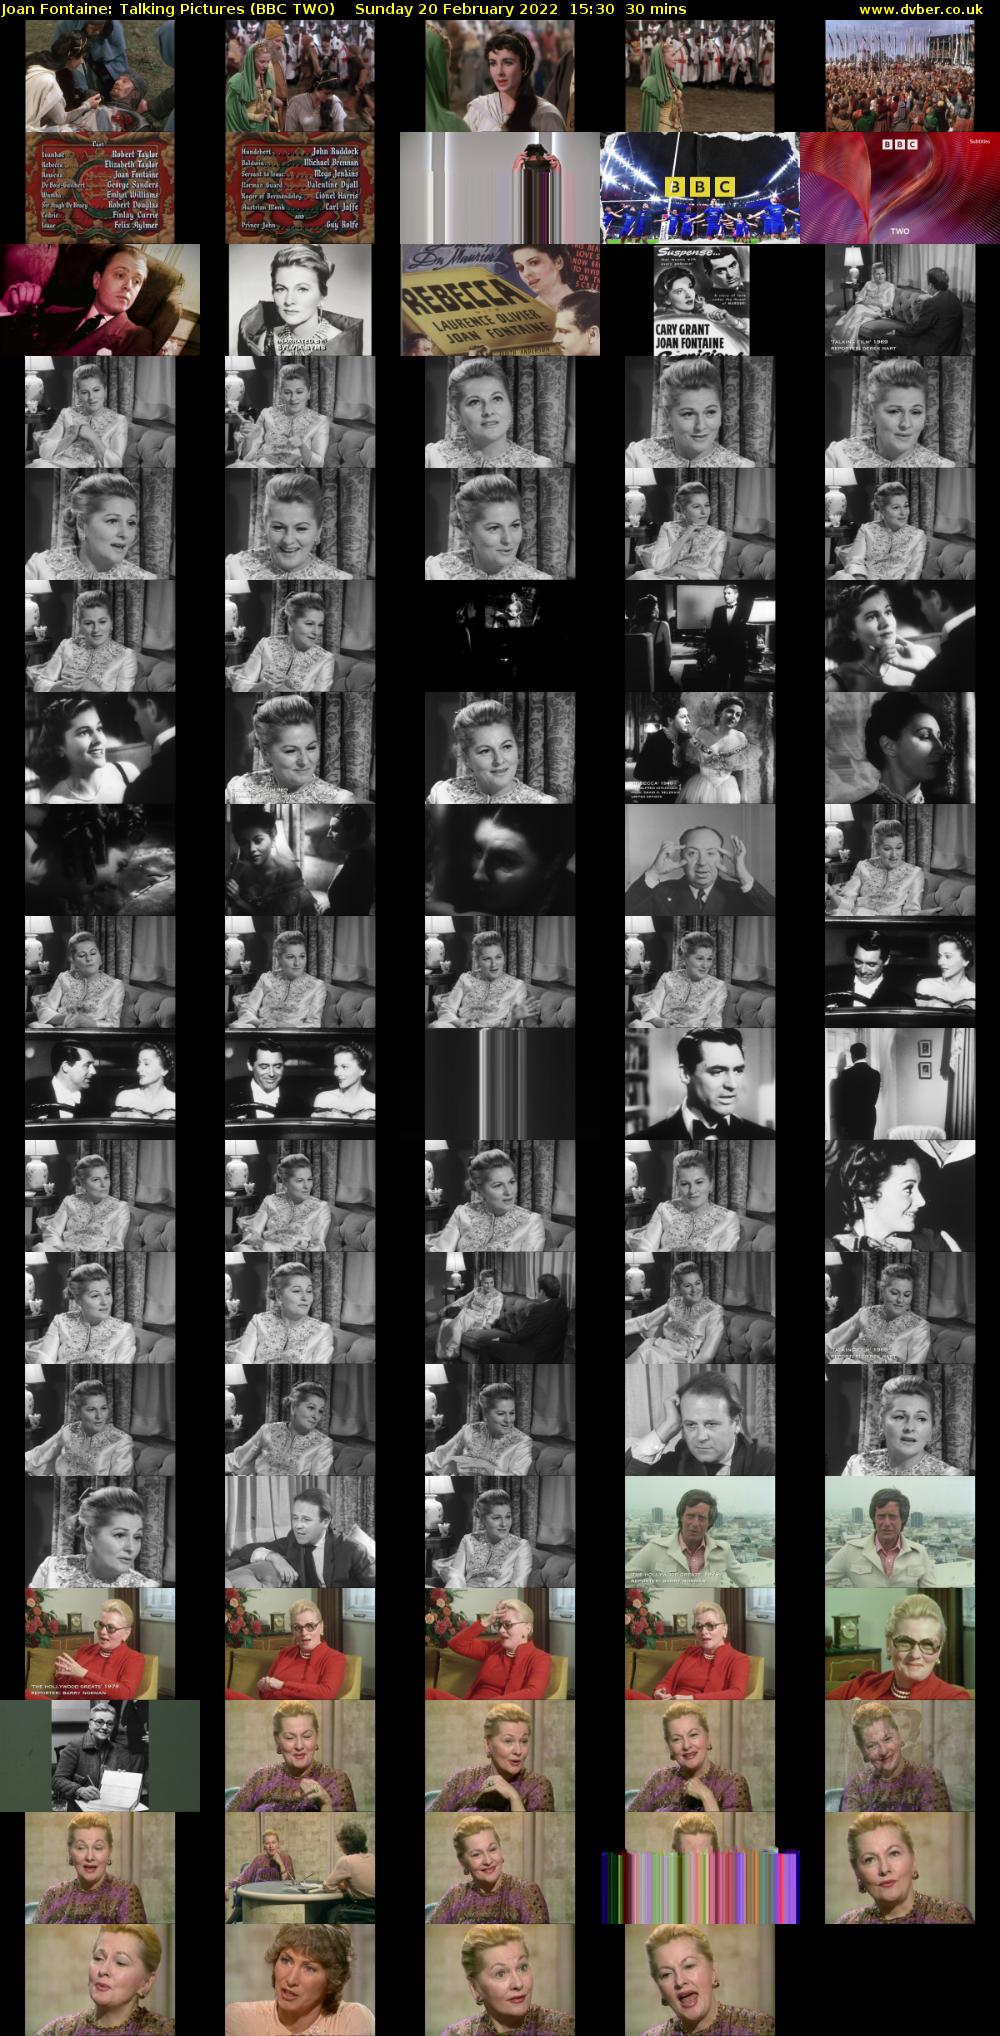 Joan Fontaine: Talking Pictures (BBC TWO) Sunday 20 February 2022 15:30 - 16:00